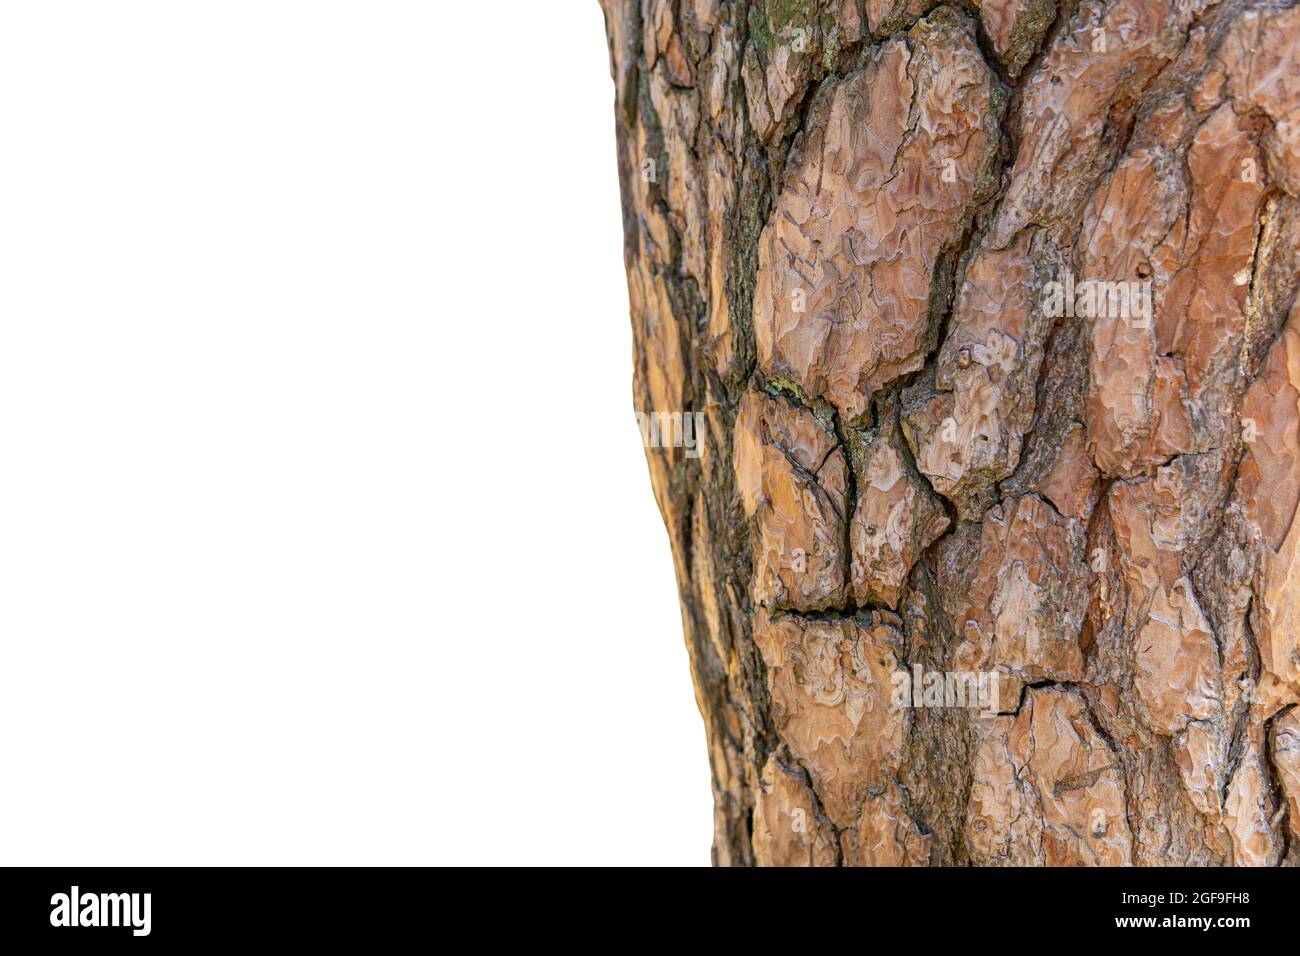 Seeing a face-like pattern on a tree trunk isolated on white Stock Photo